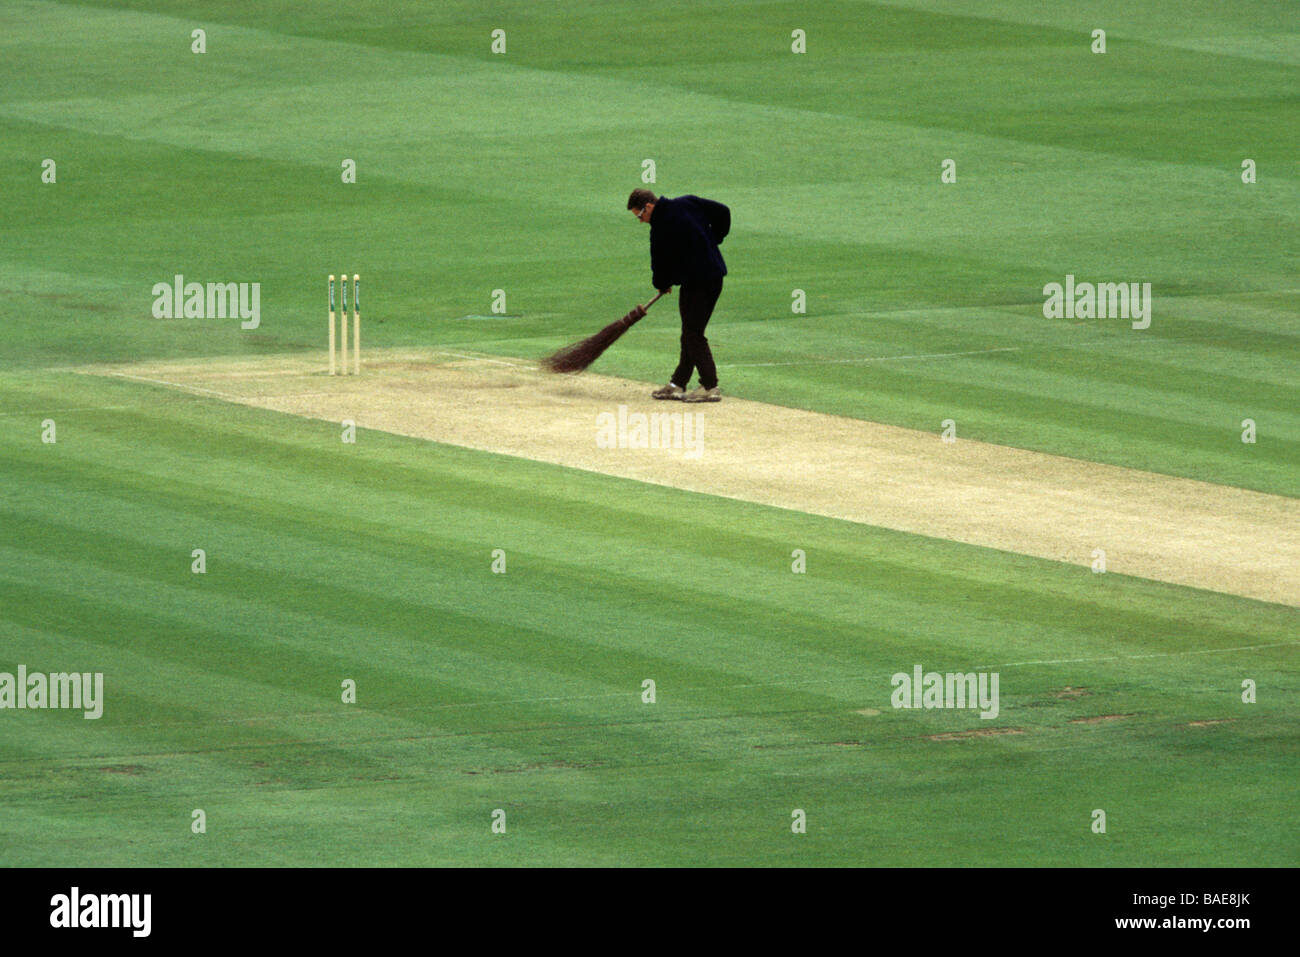 A groundsman sweeping the wicket at the Oval cricket ground Stock Photo